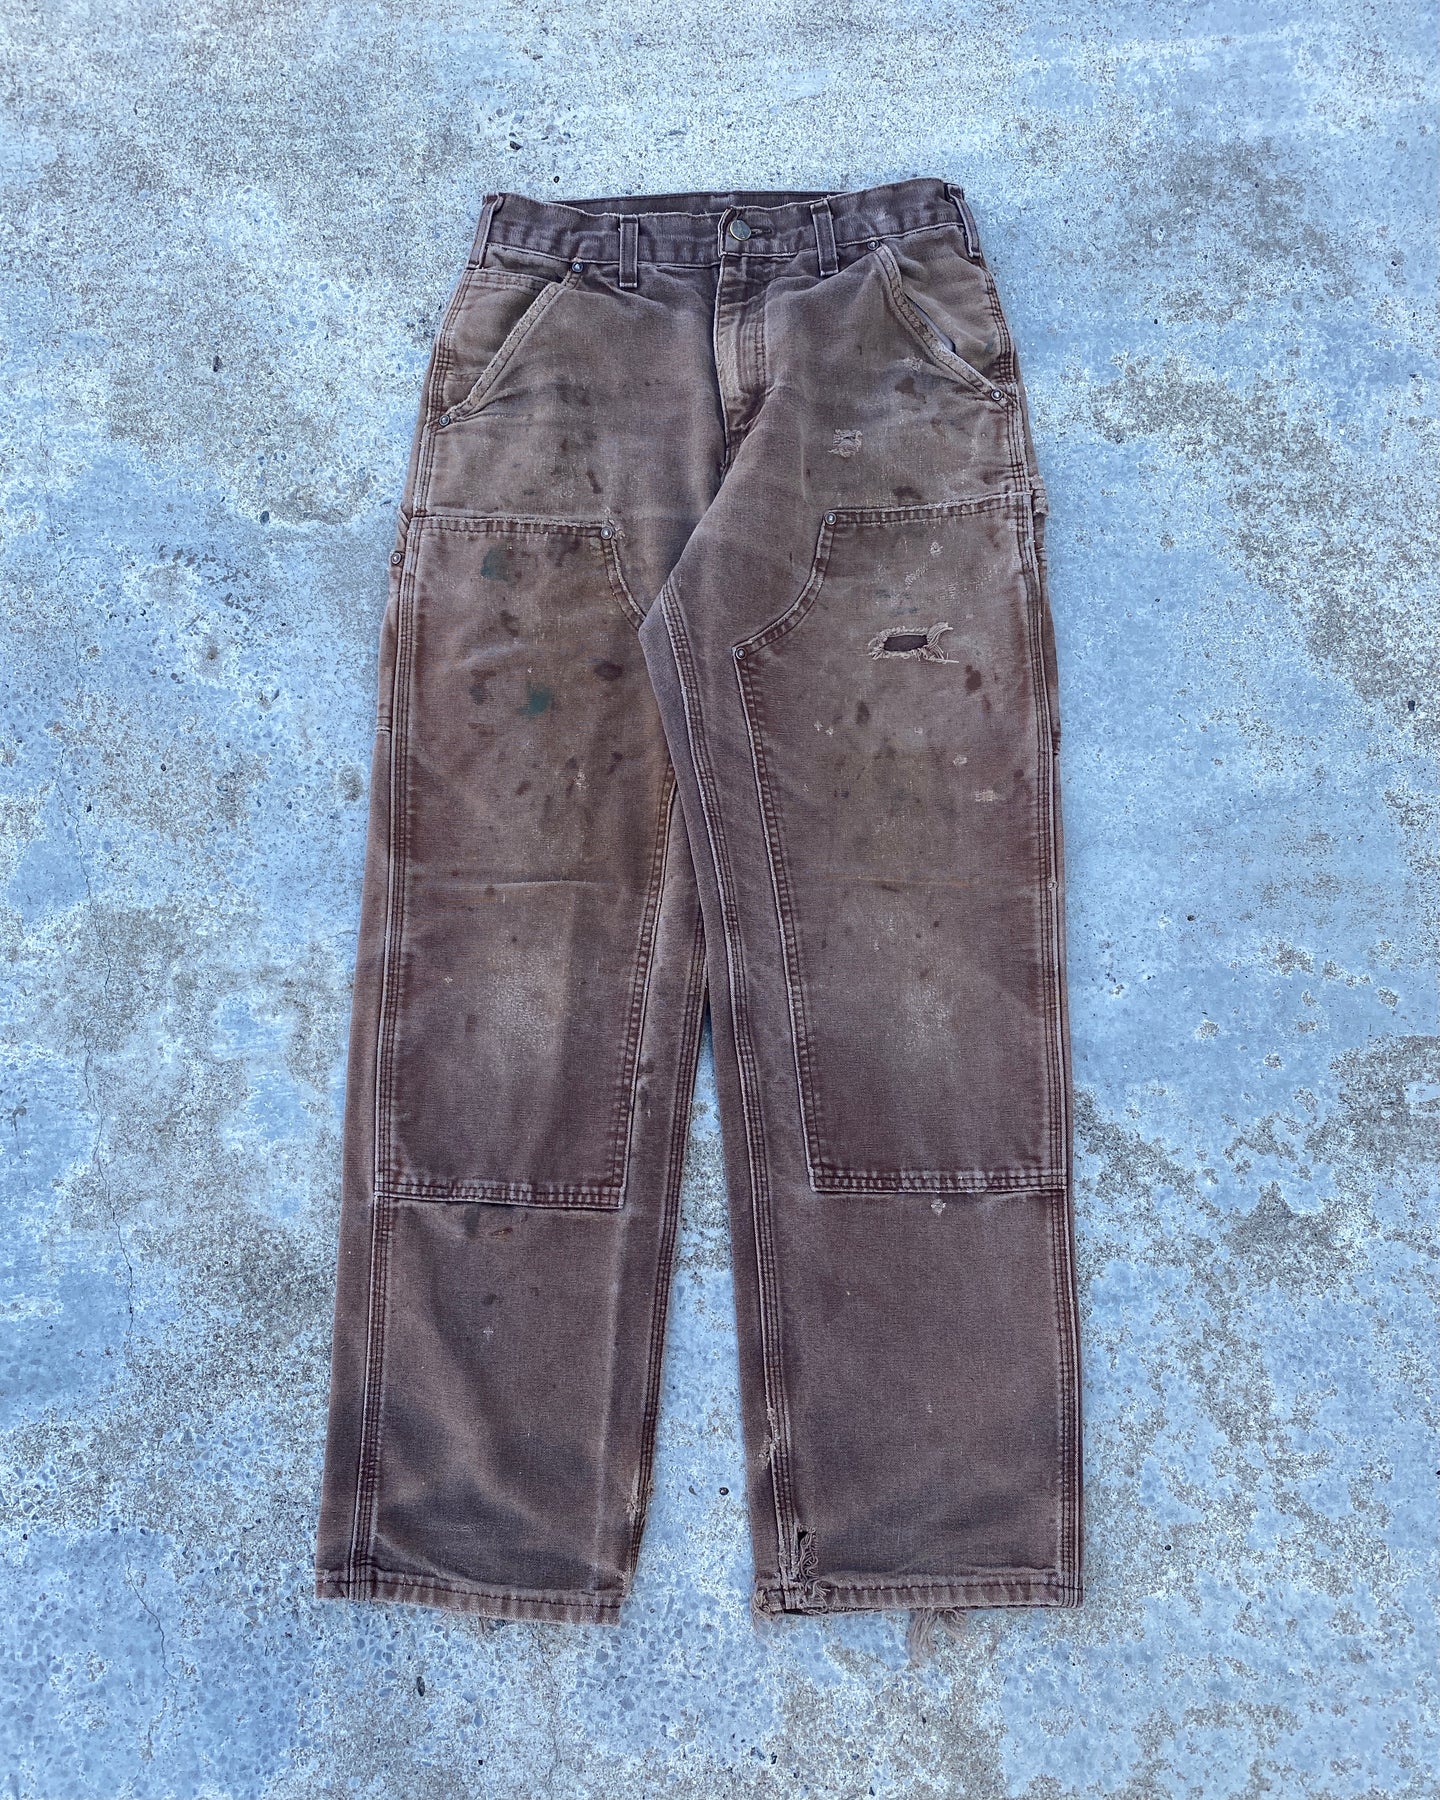 1990s Carhartt Thrashed Double Knee Pants - Size 29 x 30